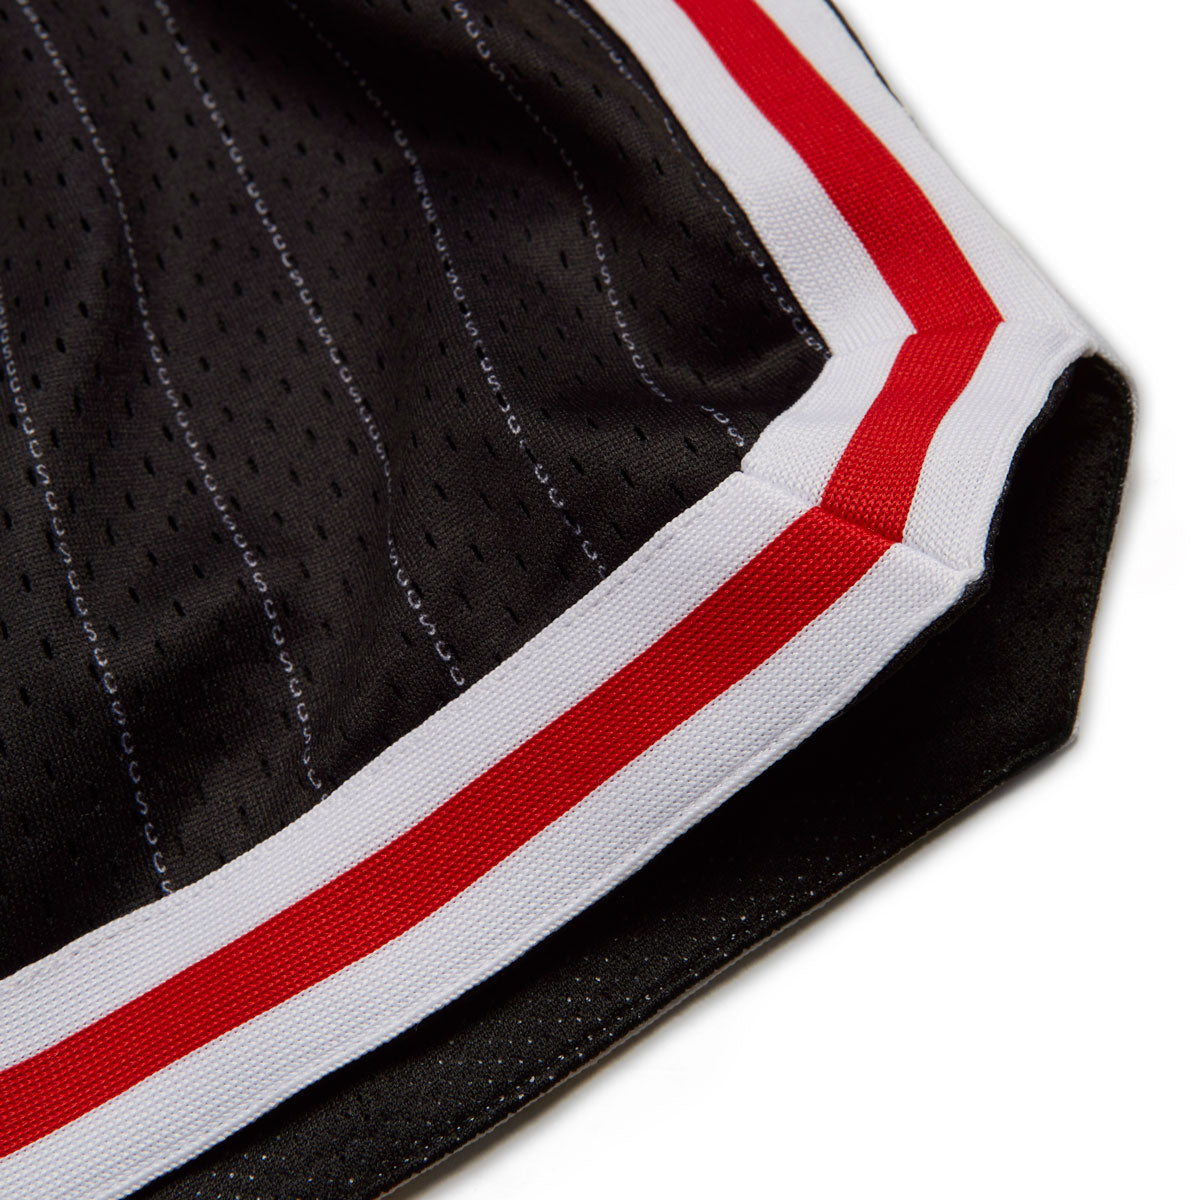 CCS Crossover Basketball Shorts - Black/Red image 4